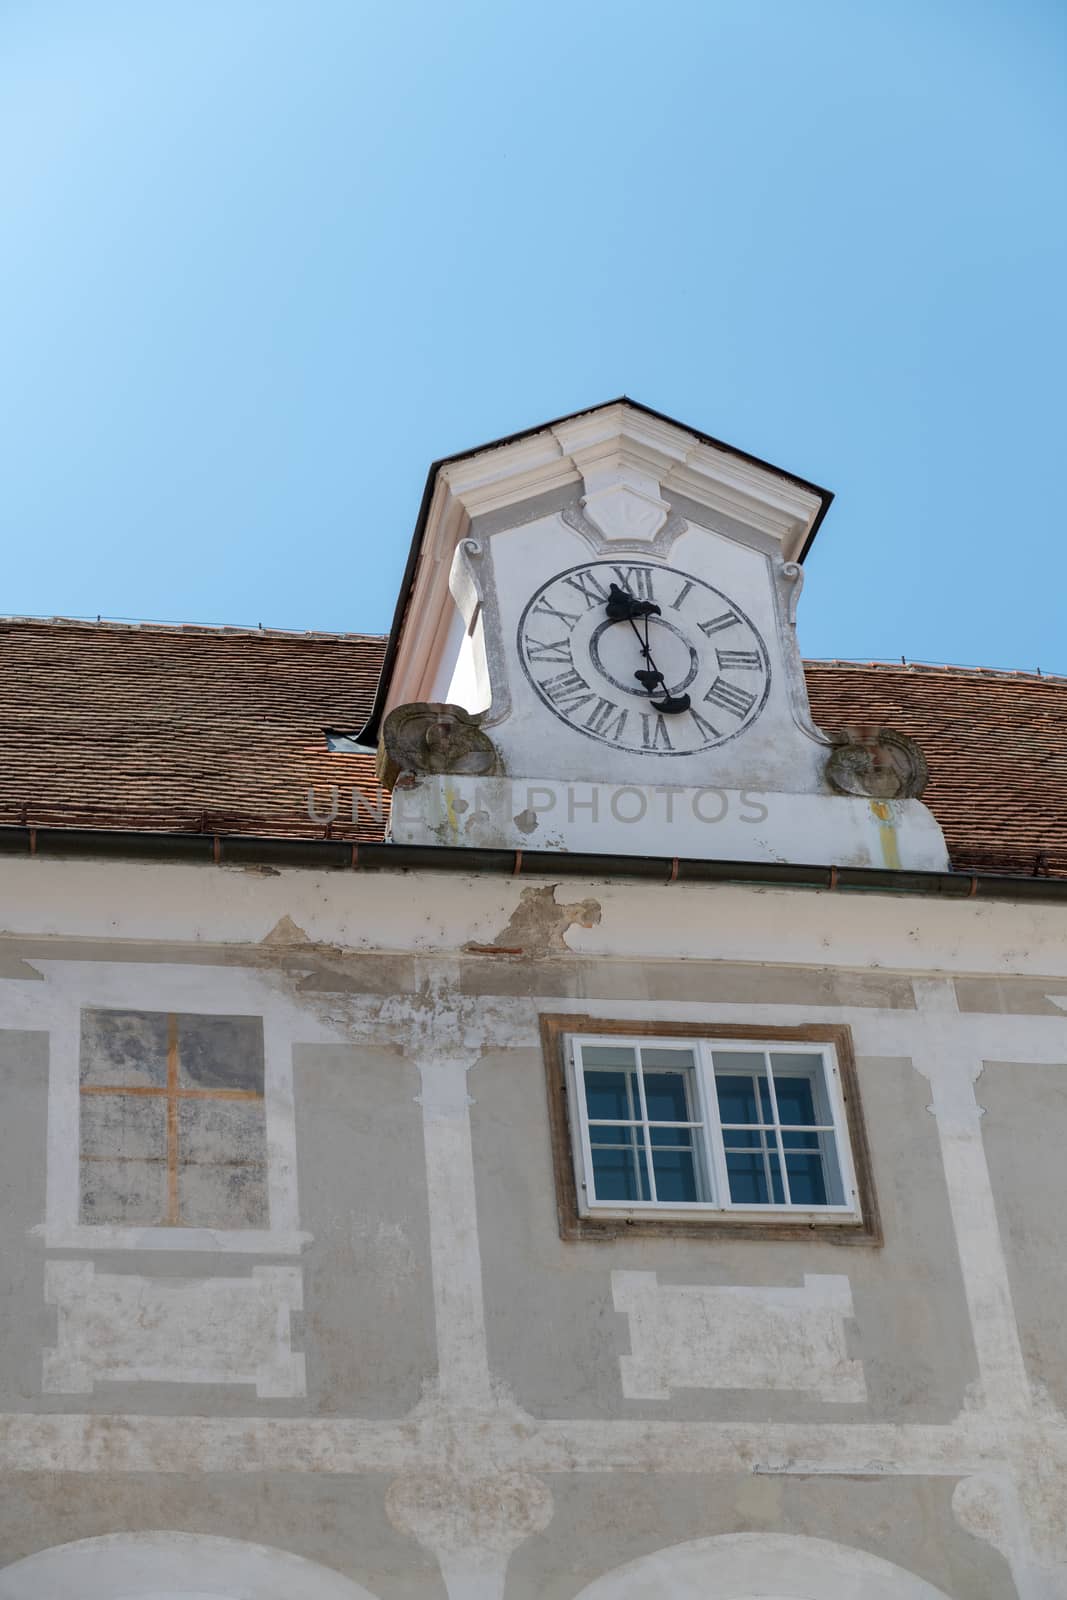 Castle tower with clock, detail of castle Slovenska Bistrica, Slovenia. Castle is publicly owned and no admission required